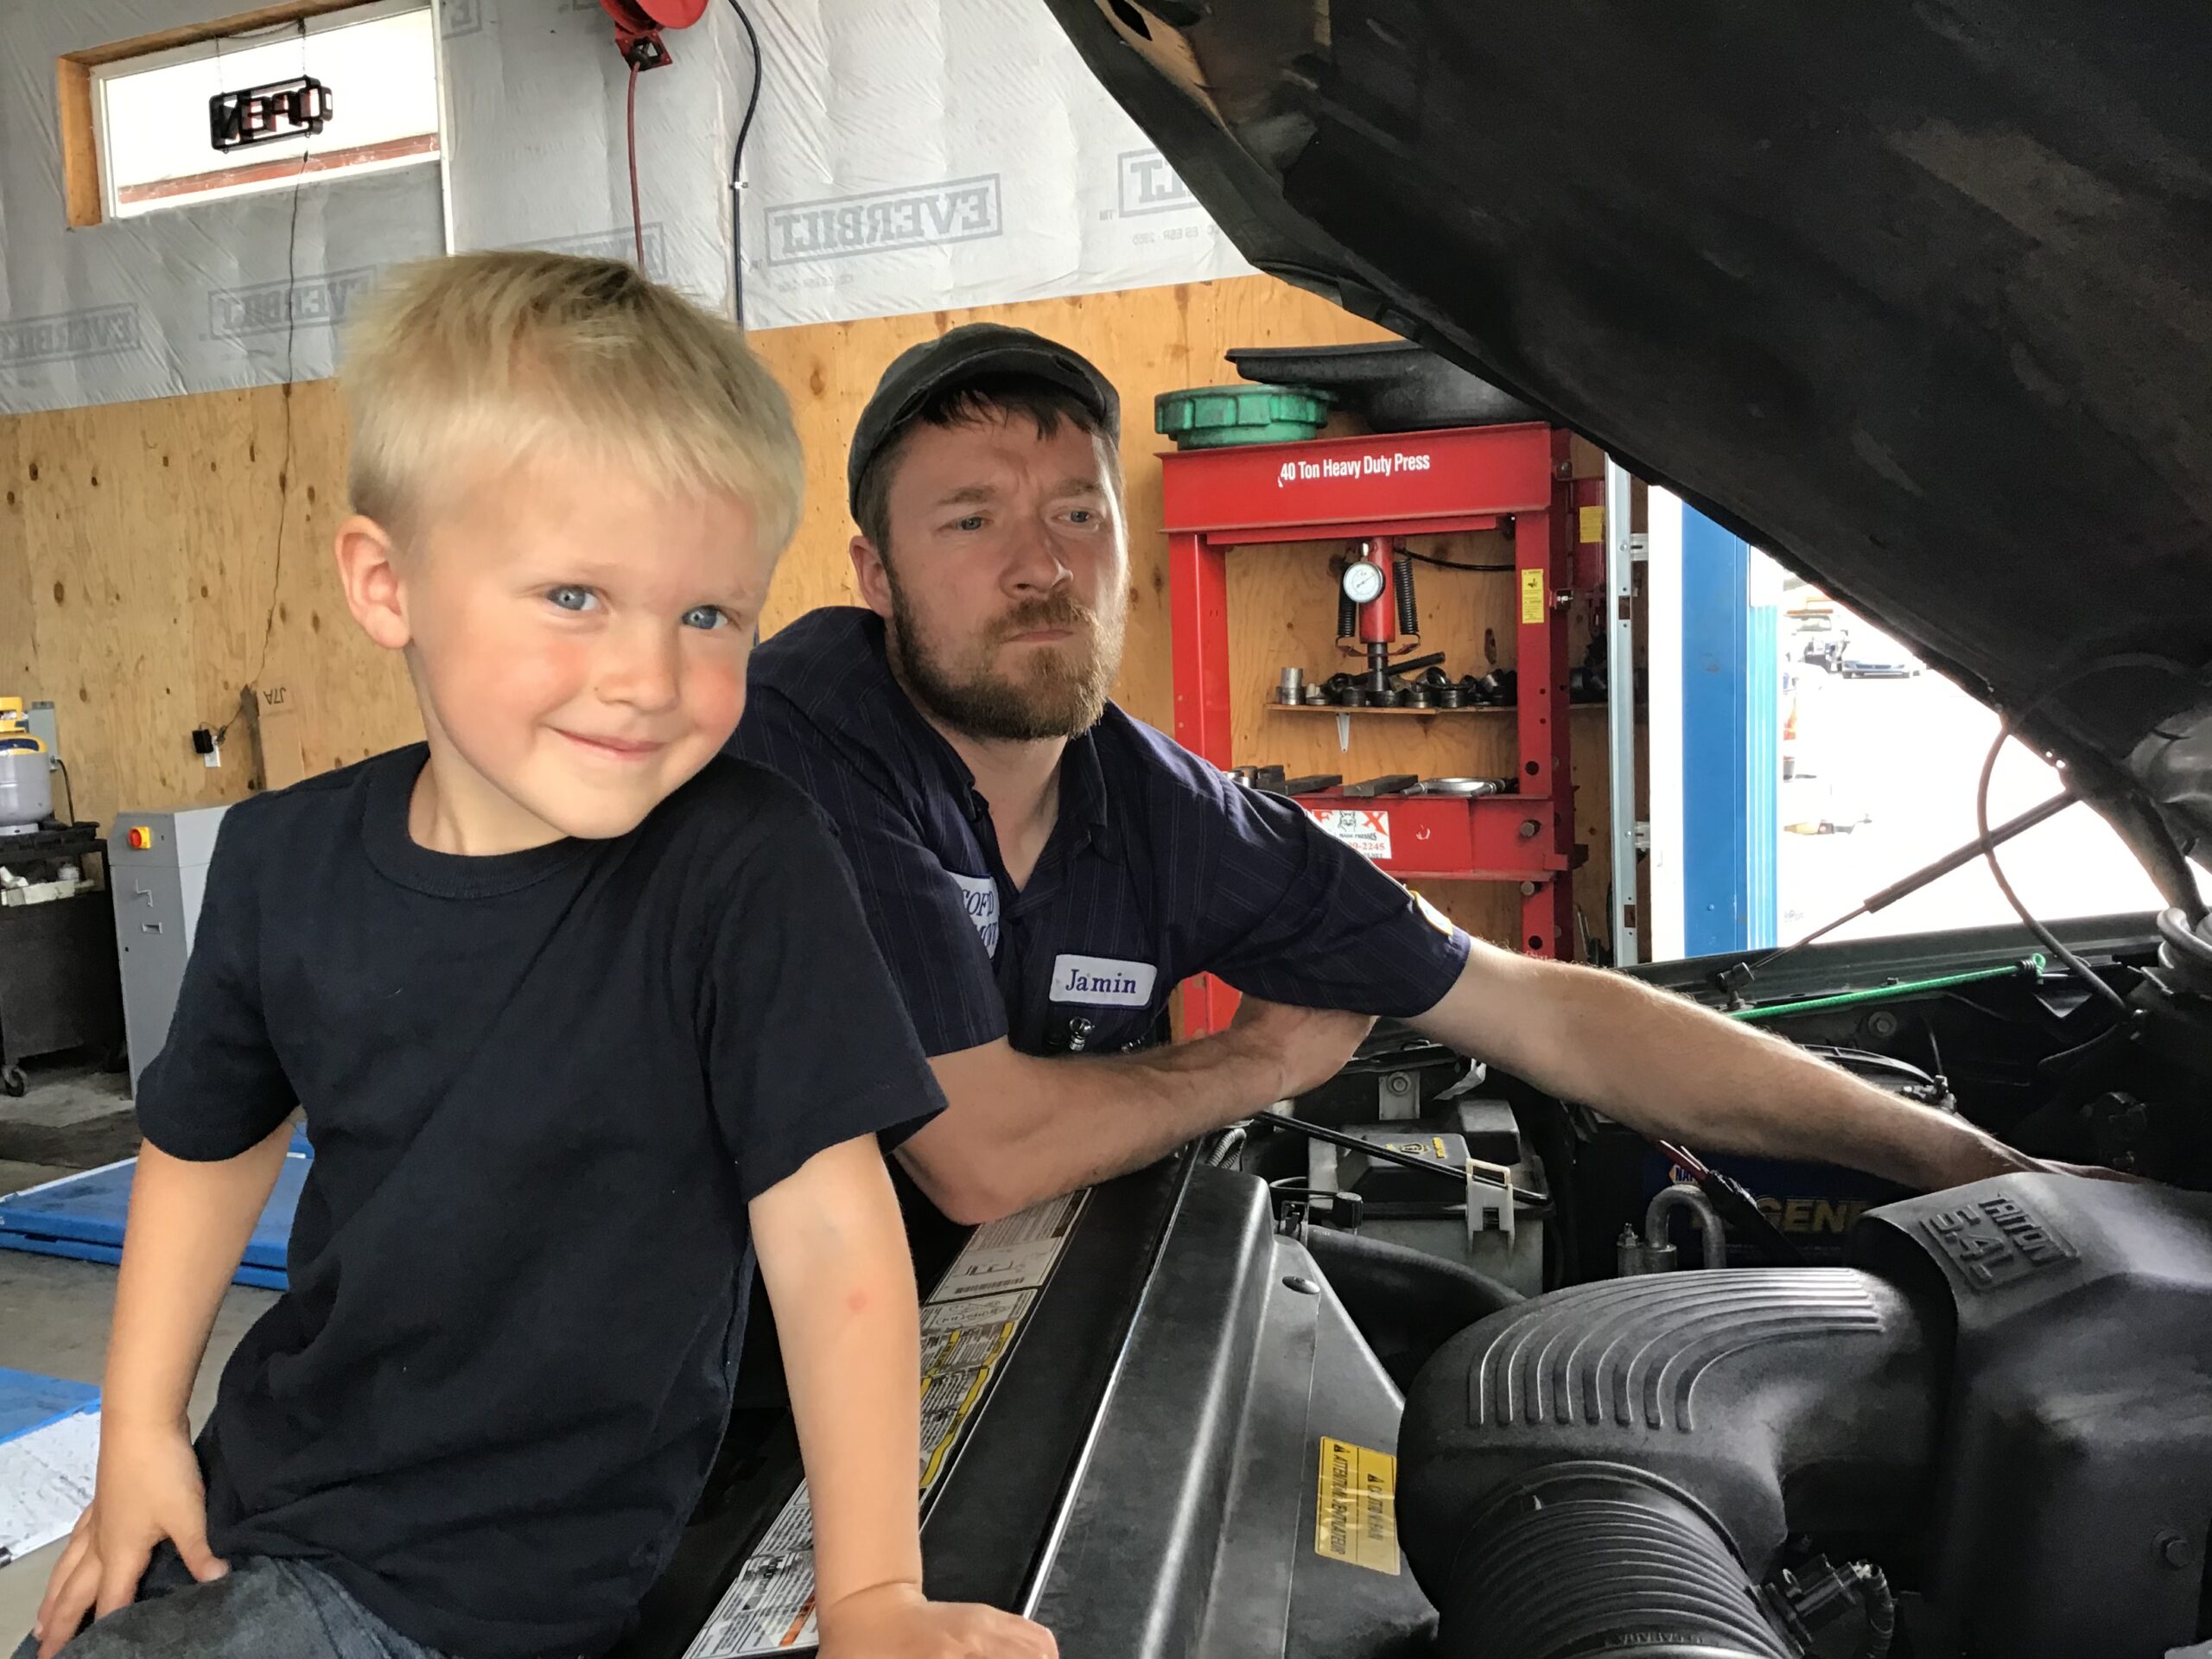 Jamin of Scofield Automotive in Roseburg and Green, OR with his son Jed